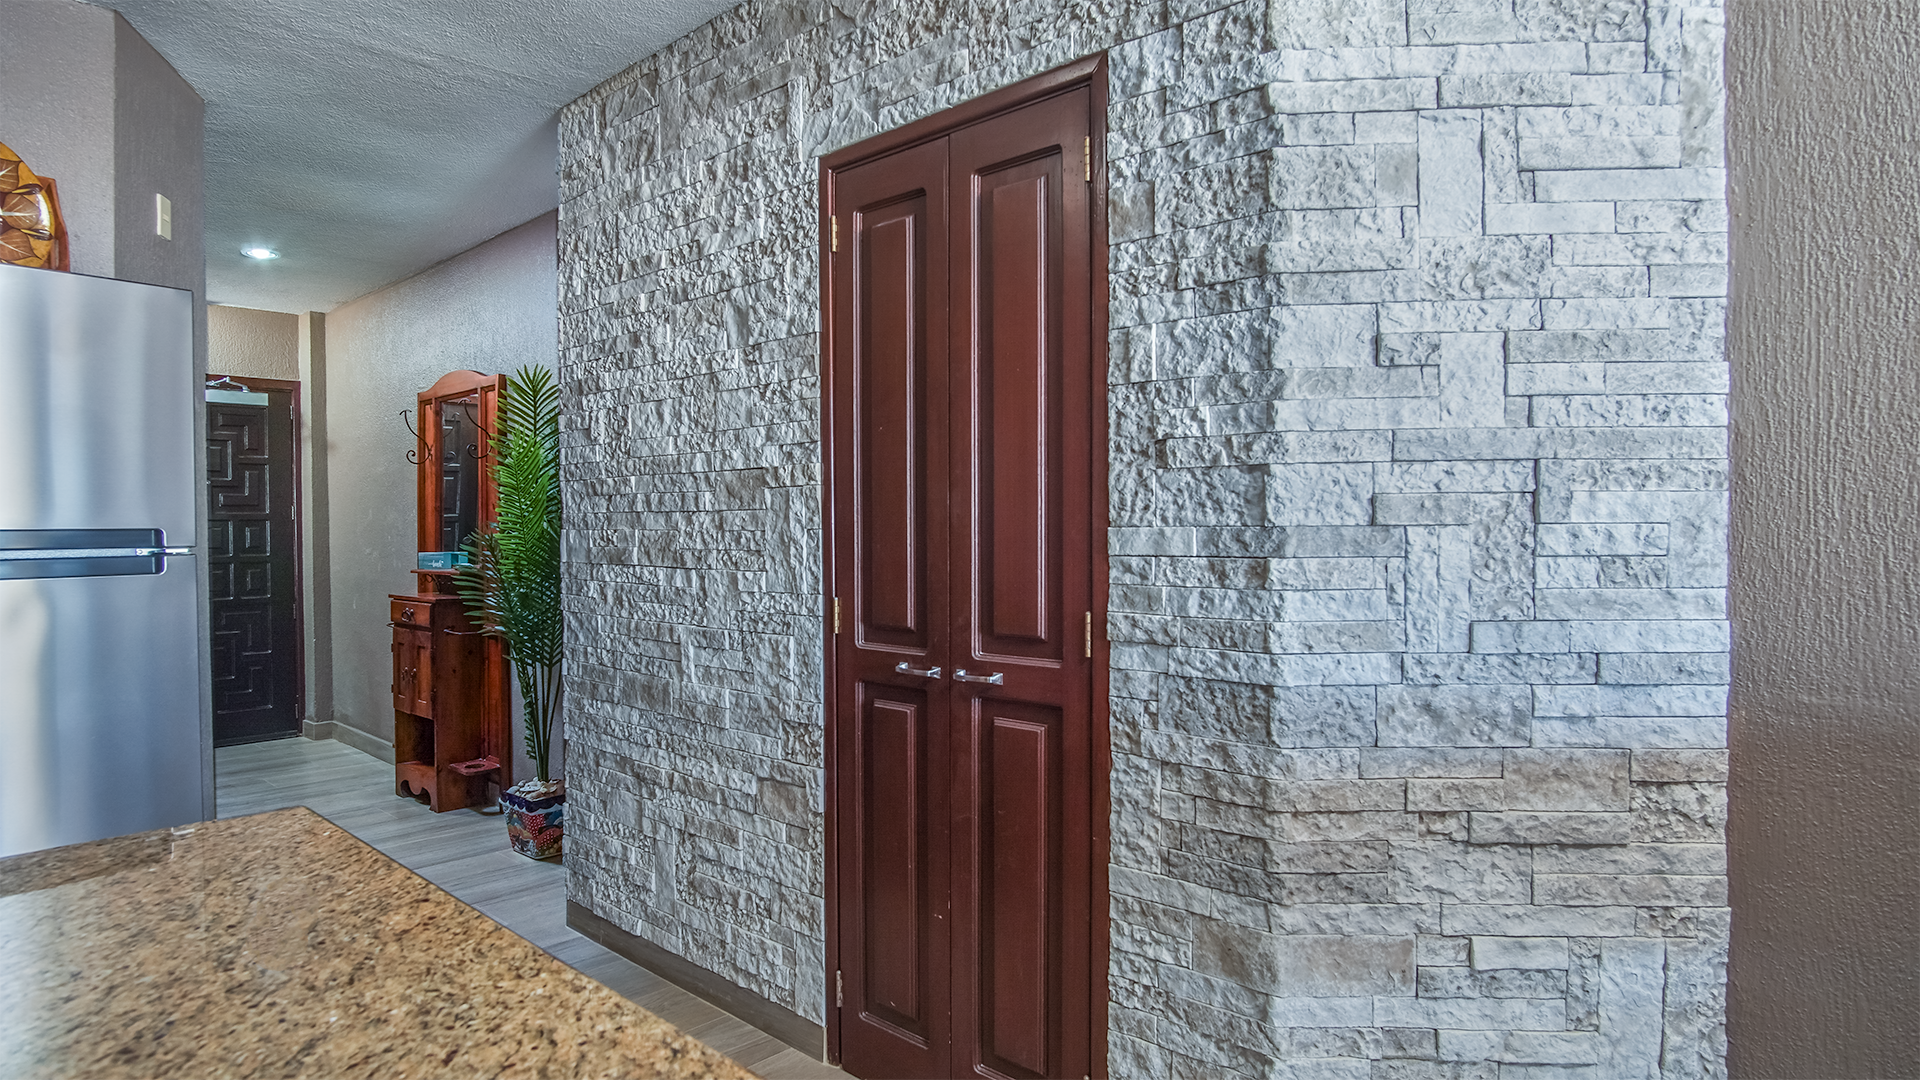 The wall between the kitchen and the entry hall is highlighted by fine stone detail.